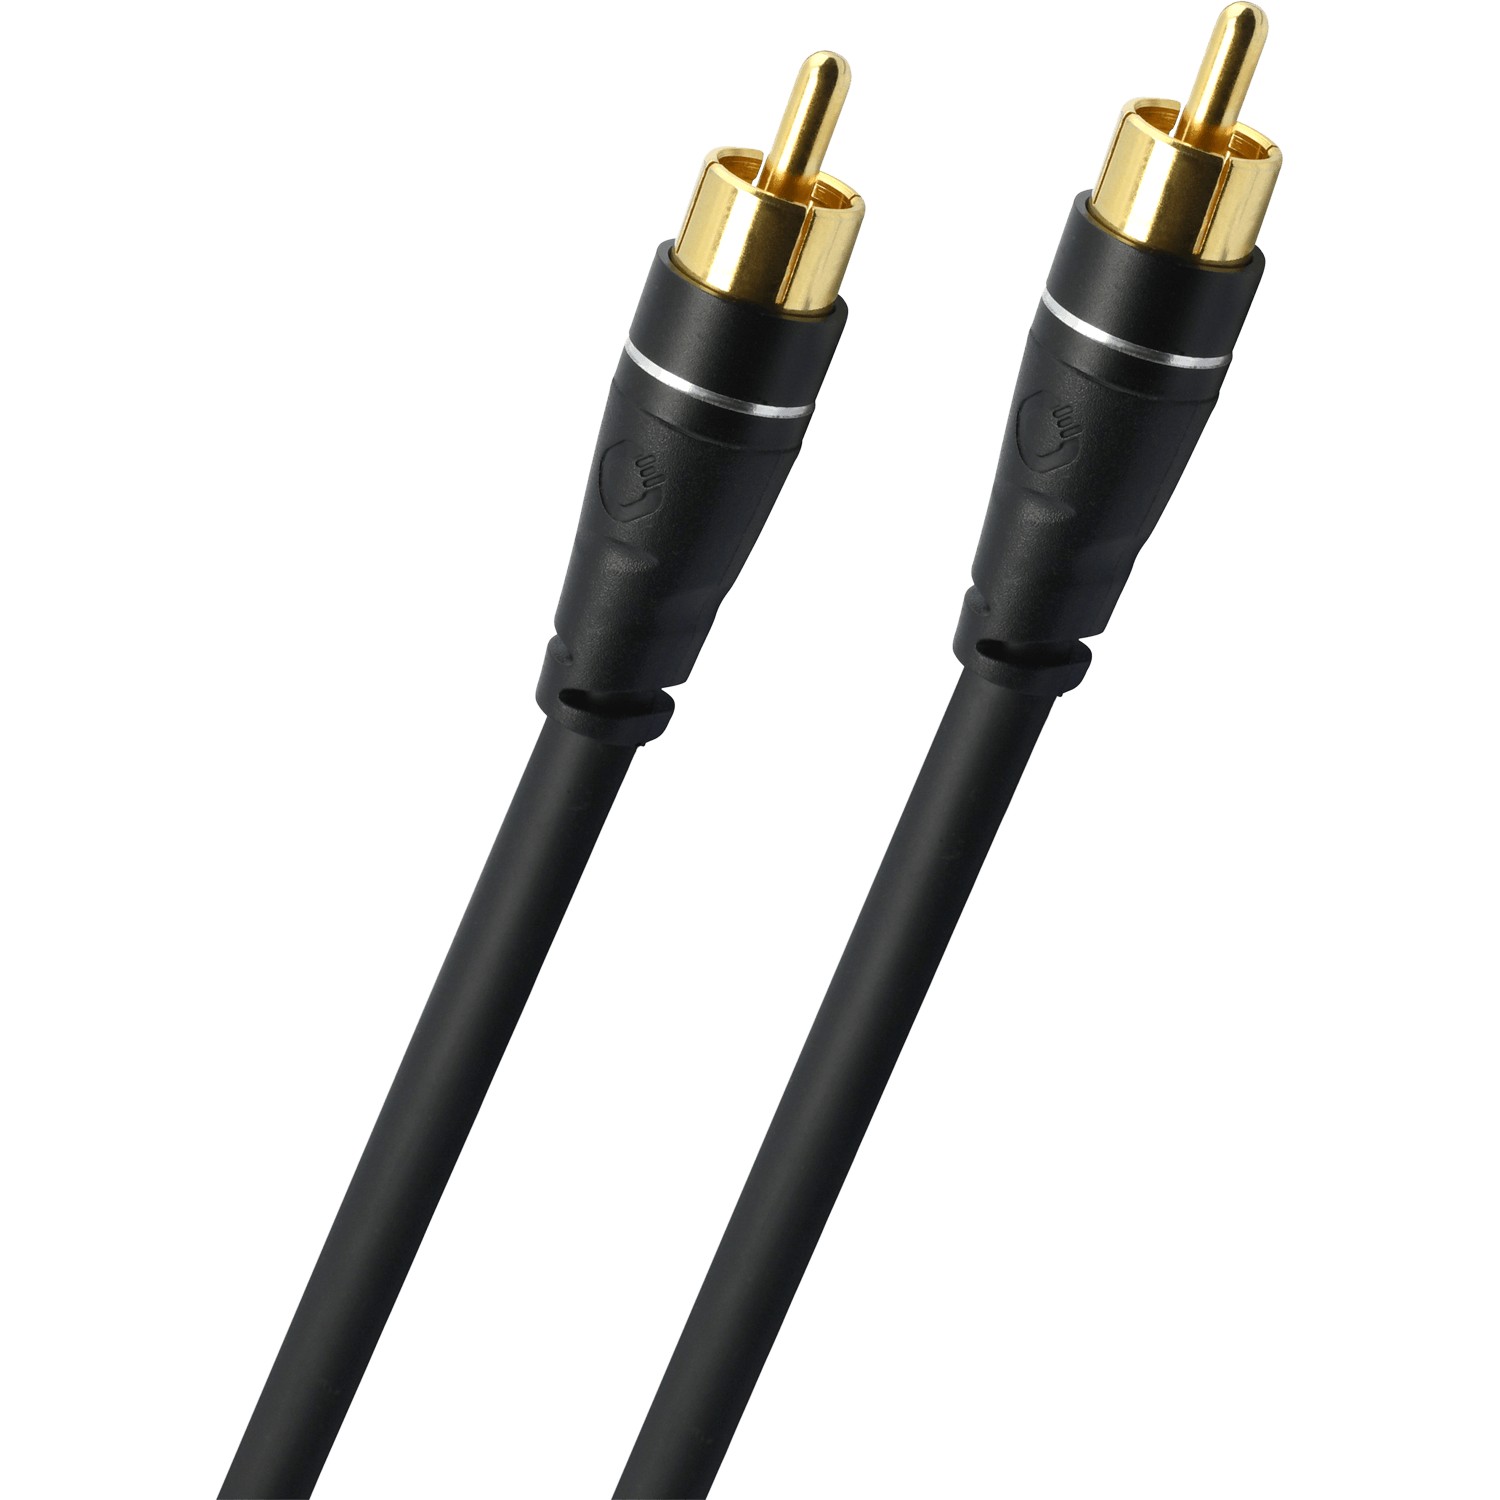 Кабели межблочные аудио Oehlbach EXCELLENCE Sub Link Subwoofer cable 10m bw, D1C33164 кабели межблочные аудио tchernov cable standard sub ic rca 5 00m